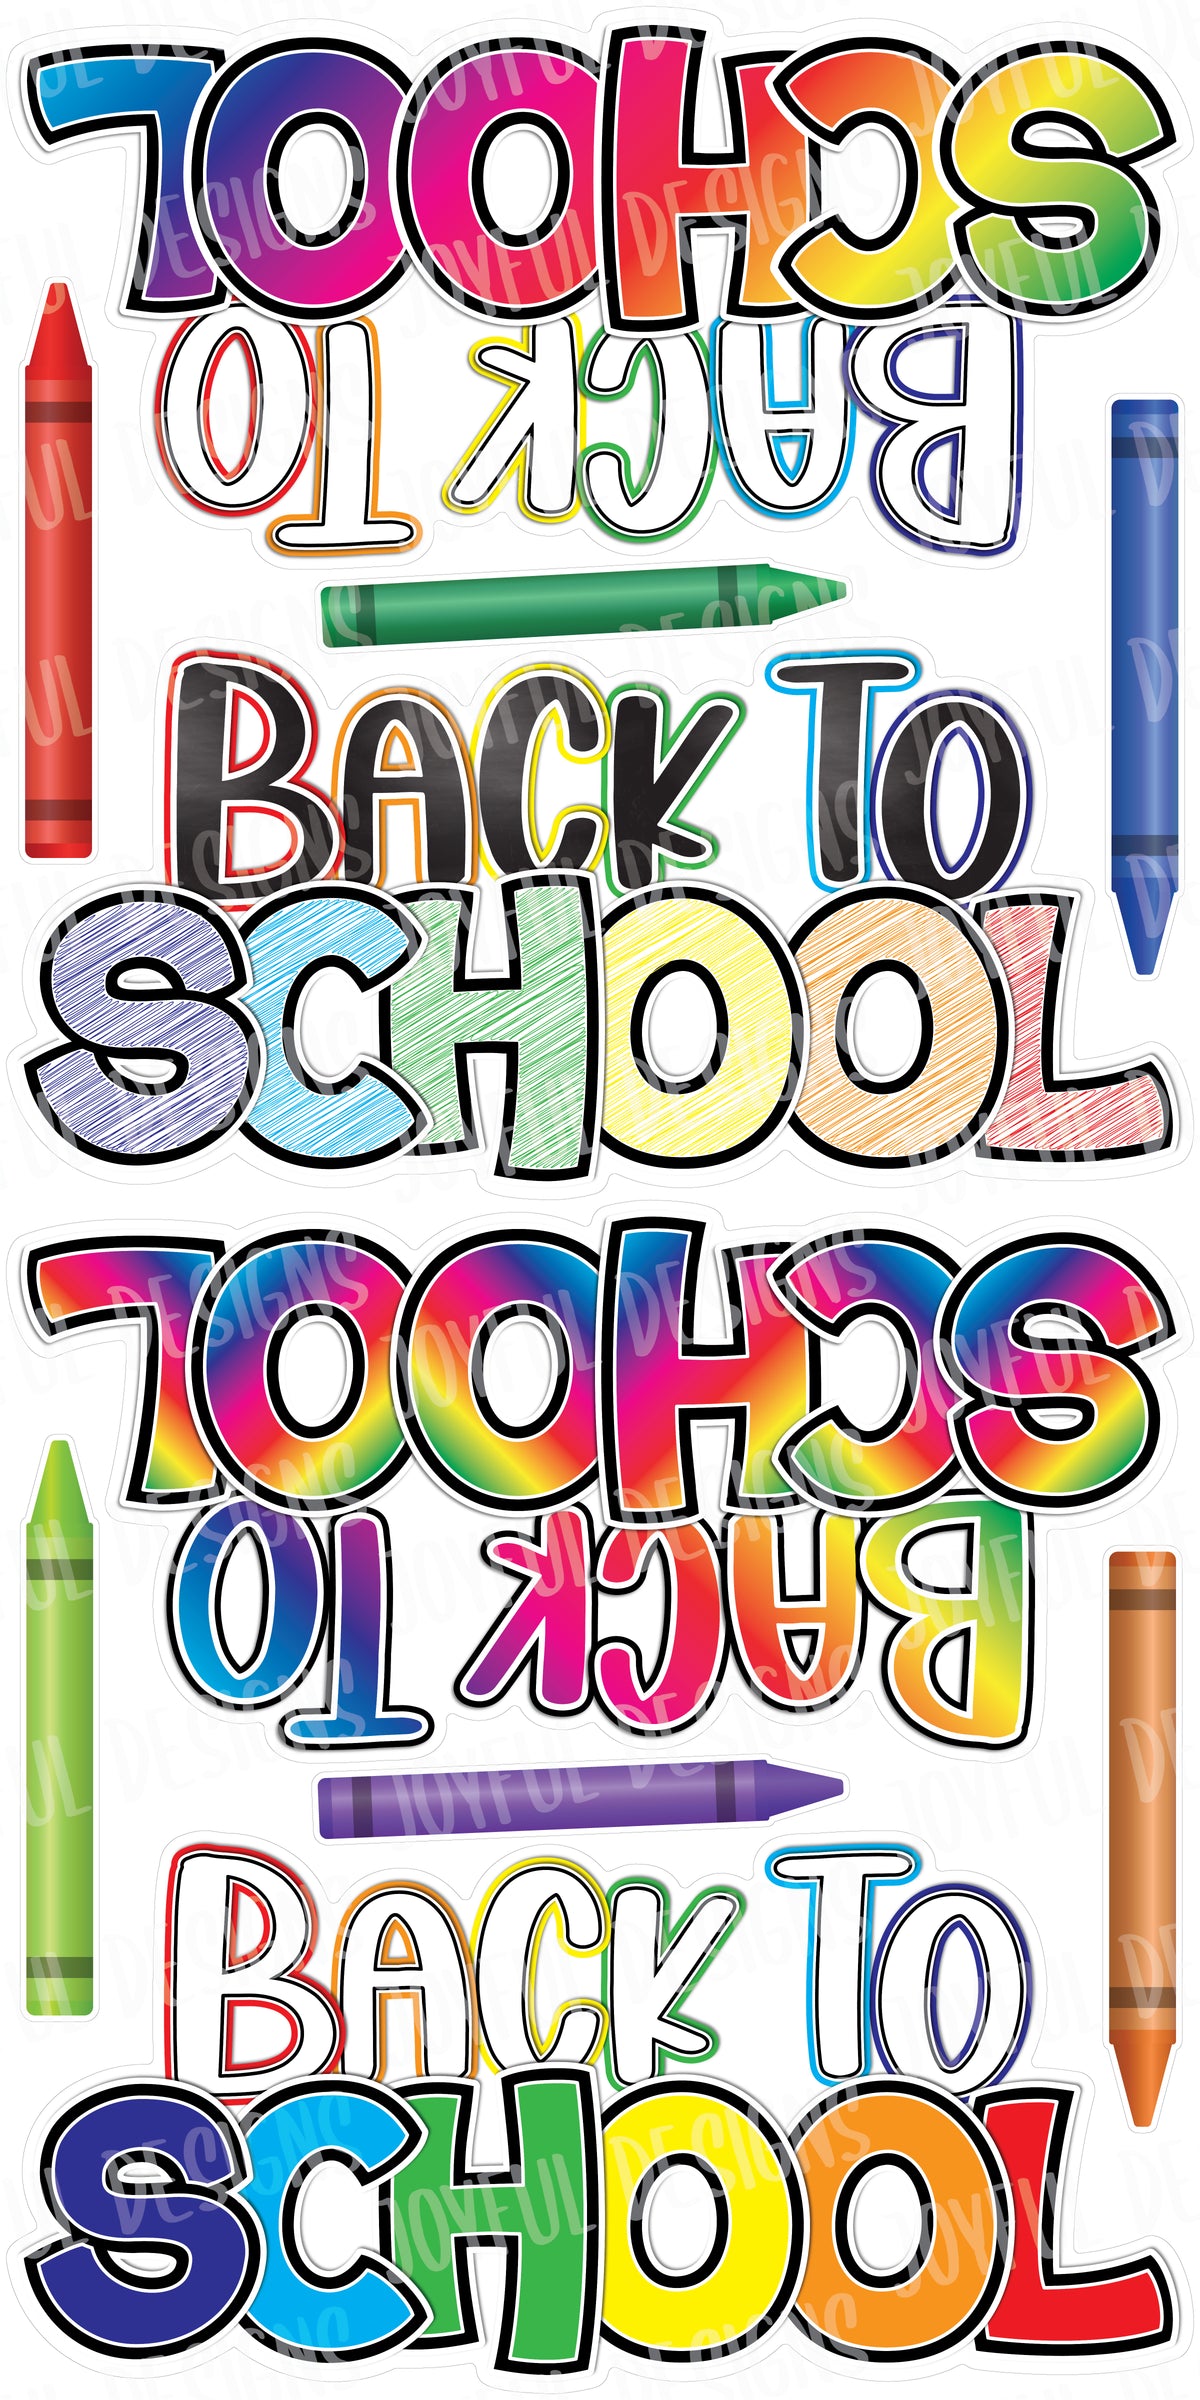 4 Back to School Centerpieces - Bouncy Font - White Background